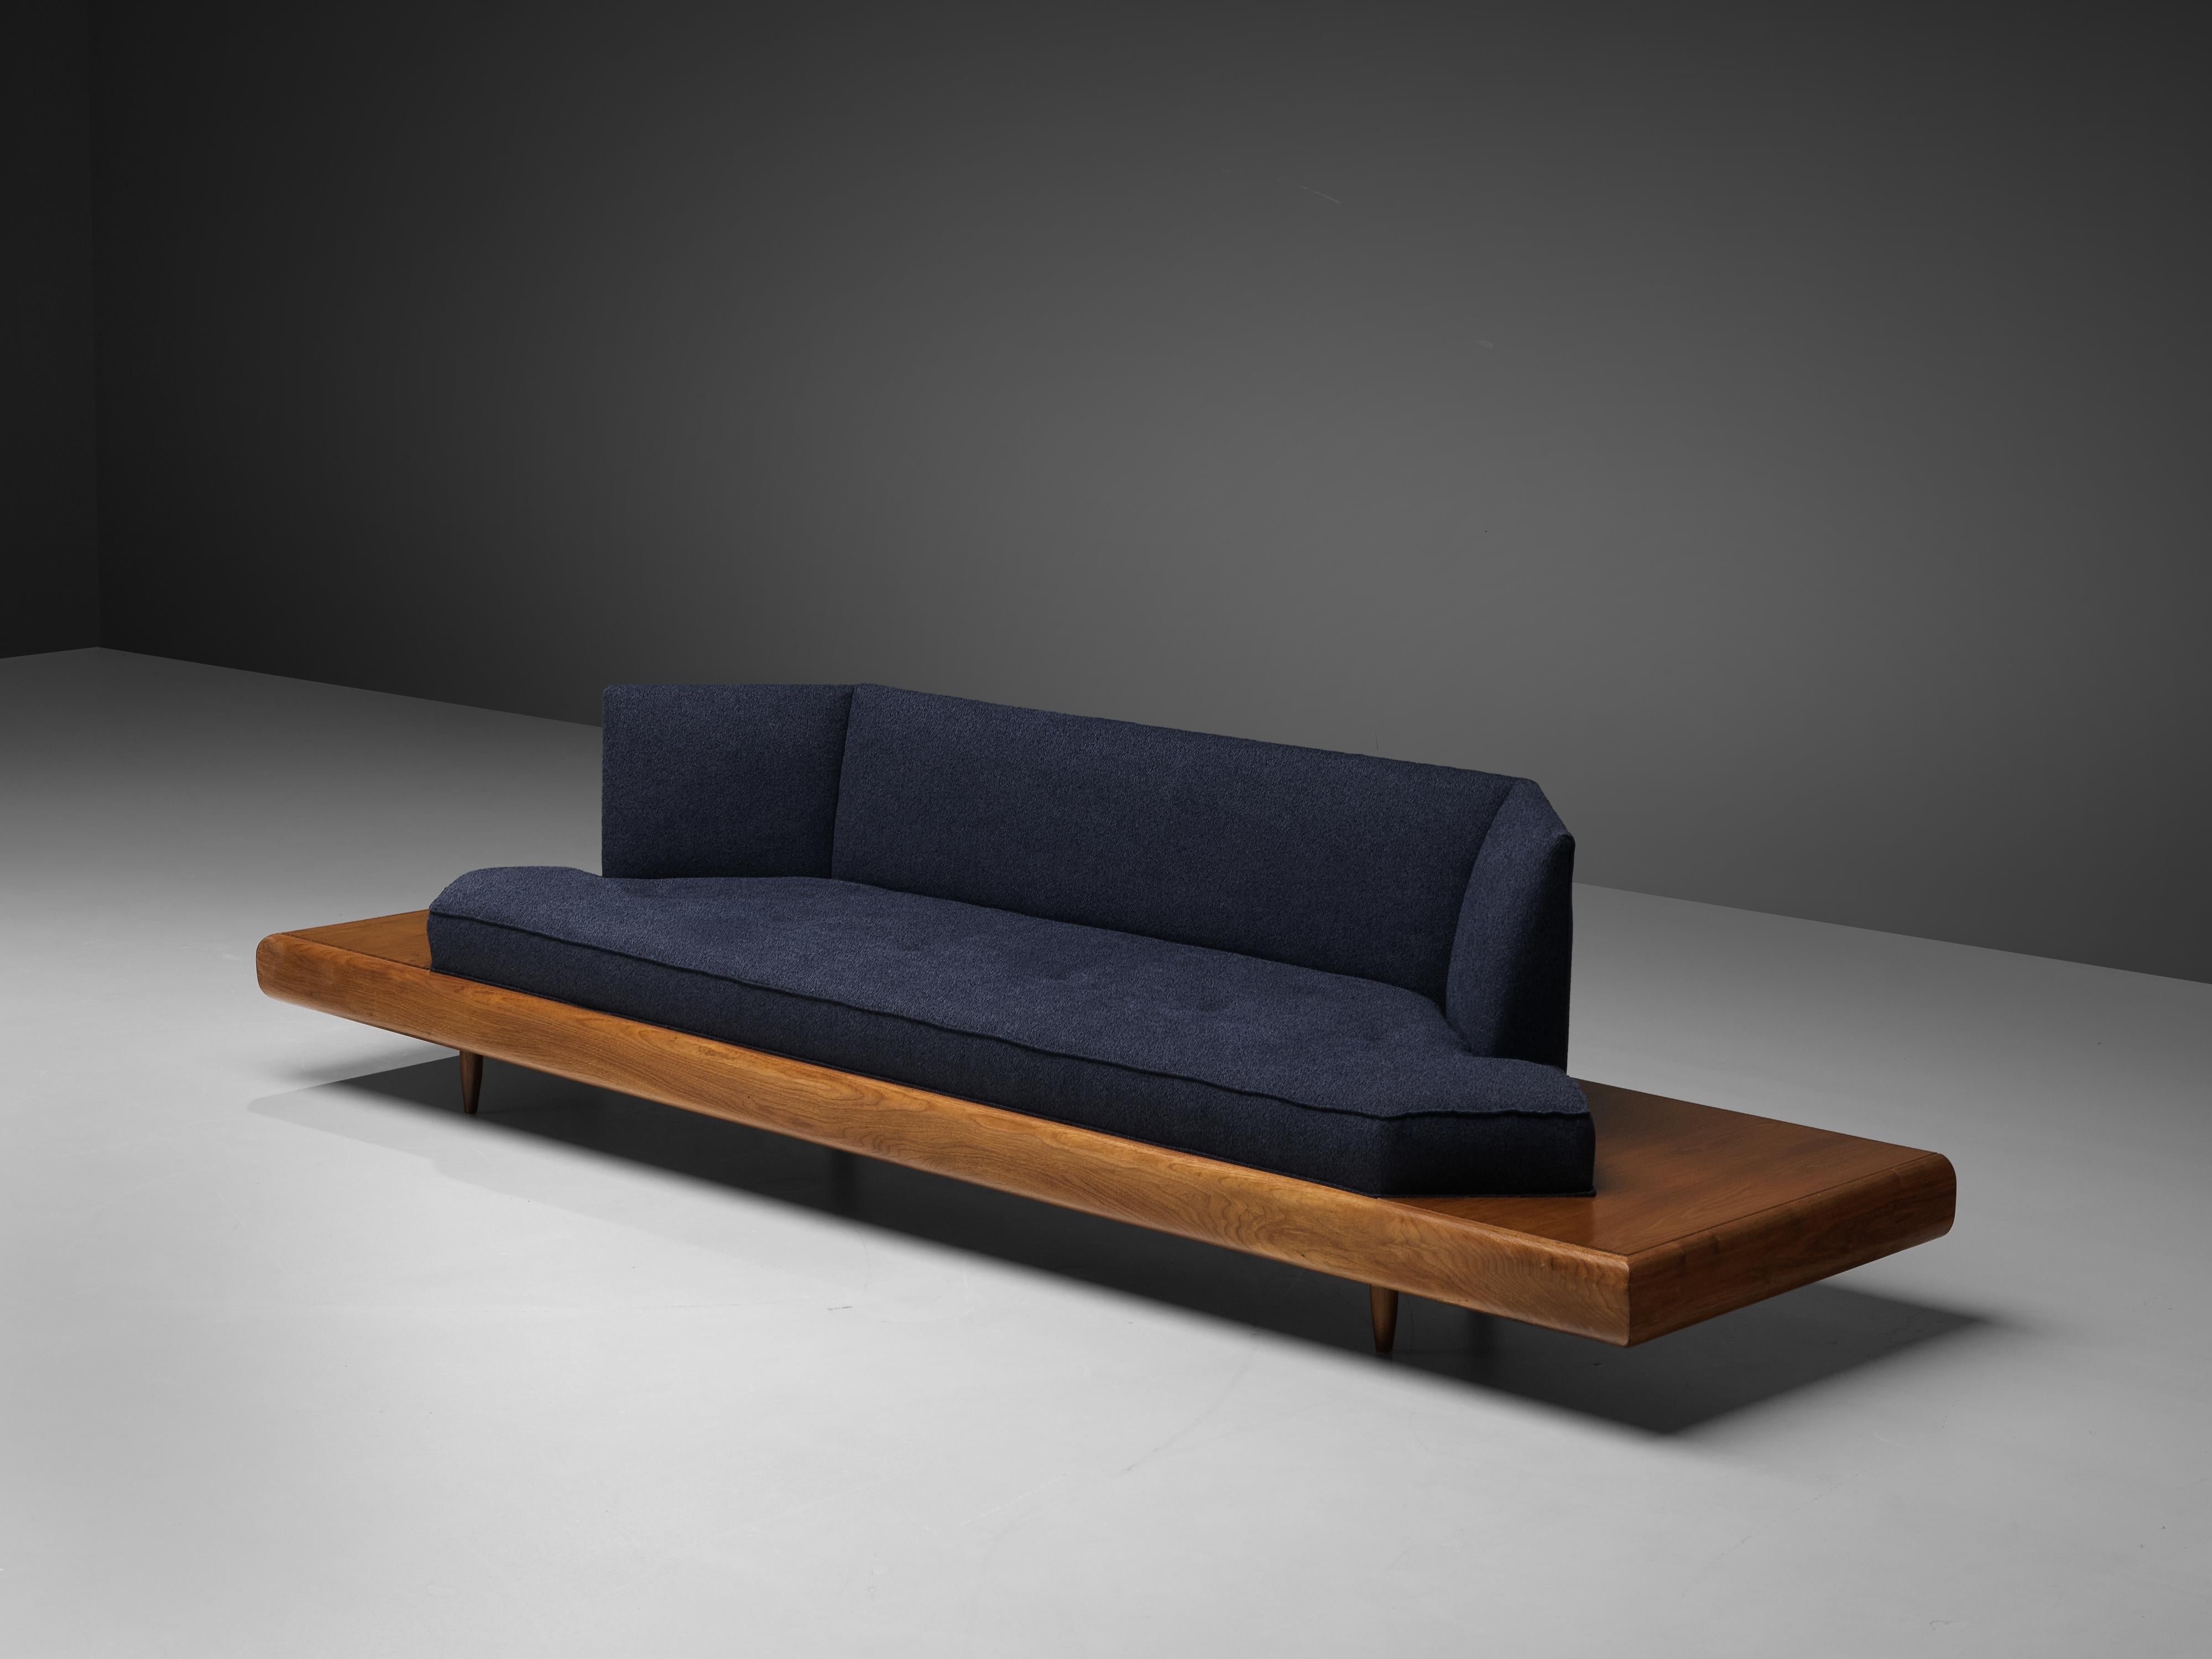 Adrian Pearsall, sofa model '2006S', blue fabric, walnut, United States, 1960s.

Classic, soft shaped sofa has a unique feel and although it is modest and simplistic it also shows soft, delicate lines and shapes. The walnut frame that extends past